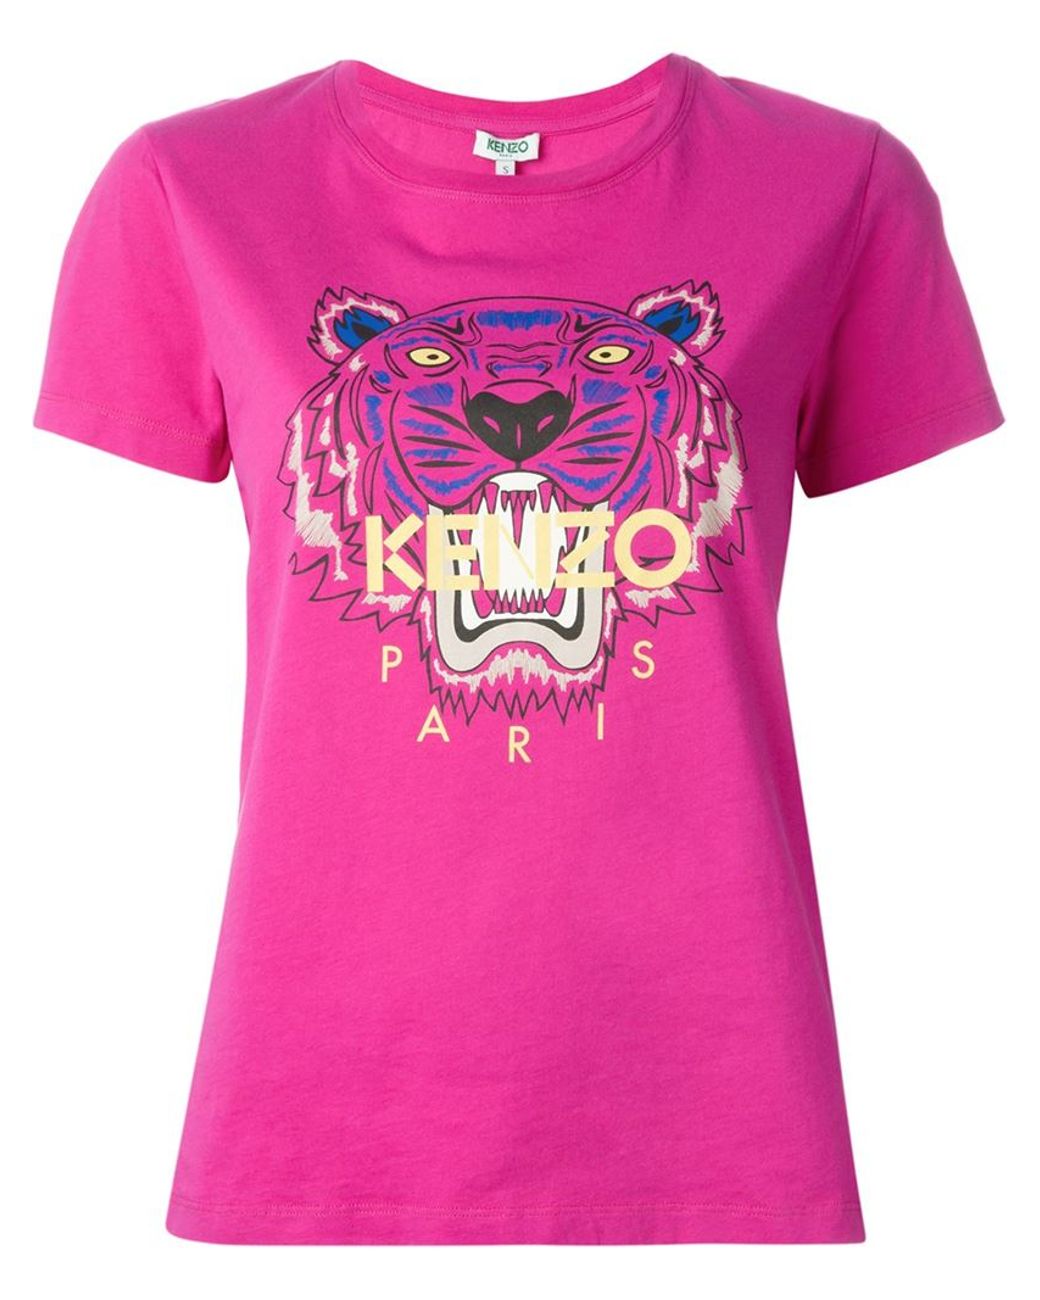 KENZO in Pink | Lyst